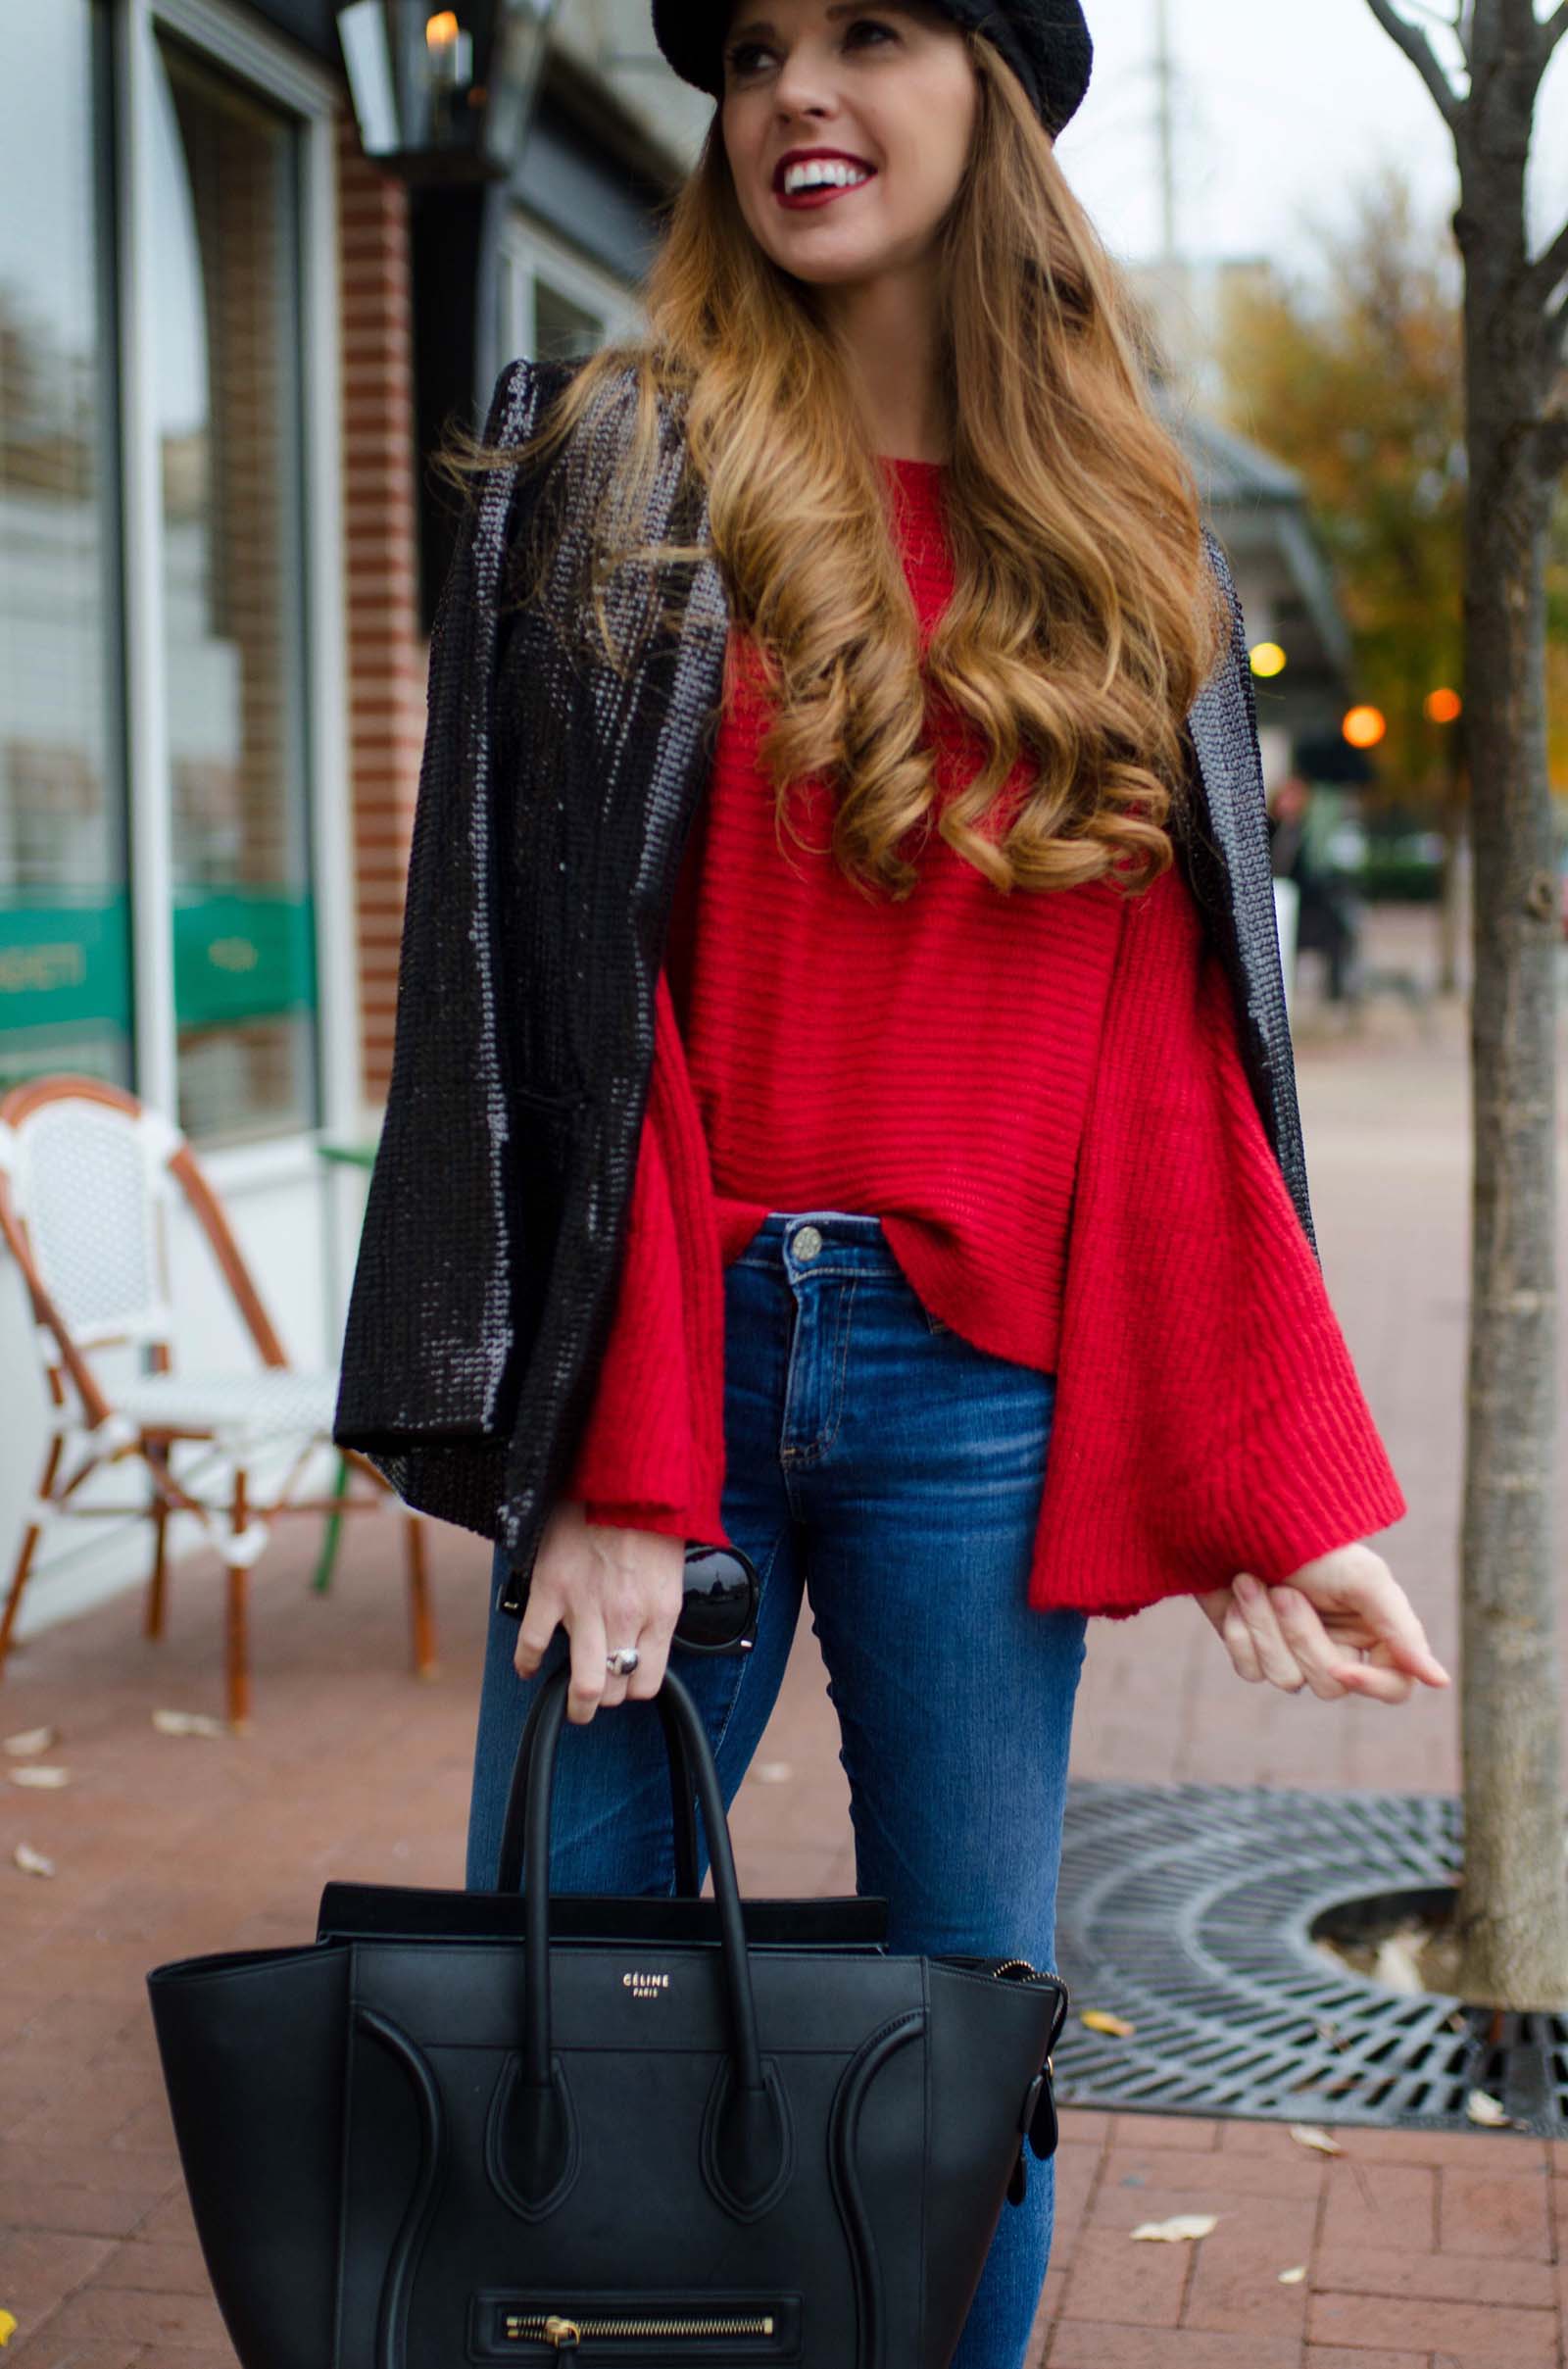 holiday-outfit-ideas-blogger-holiday-outfits-with-sequins-red-for-holidays